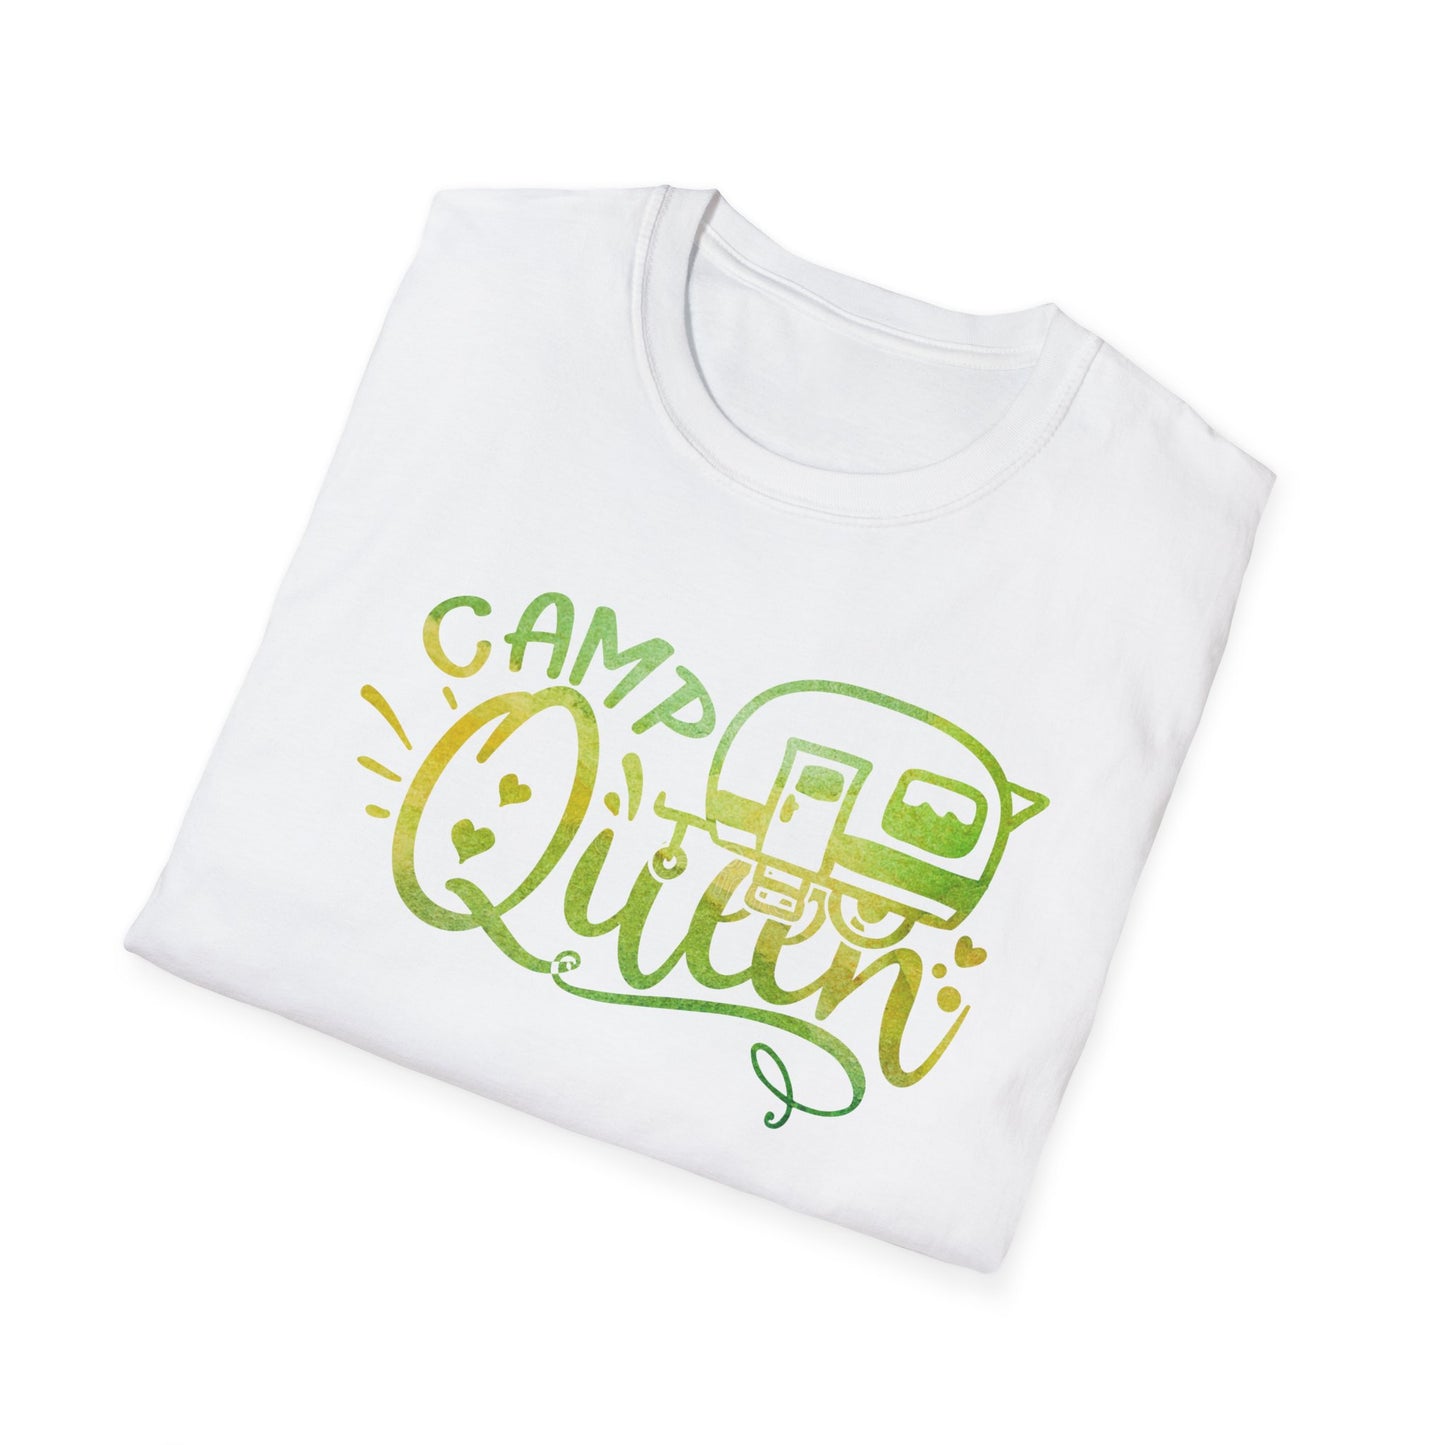 Camp Queen Tee - Camping Themed Shirt!